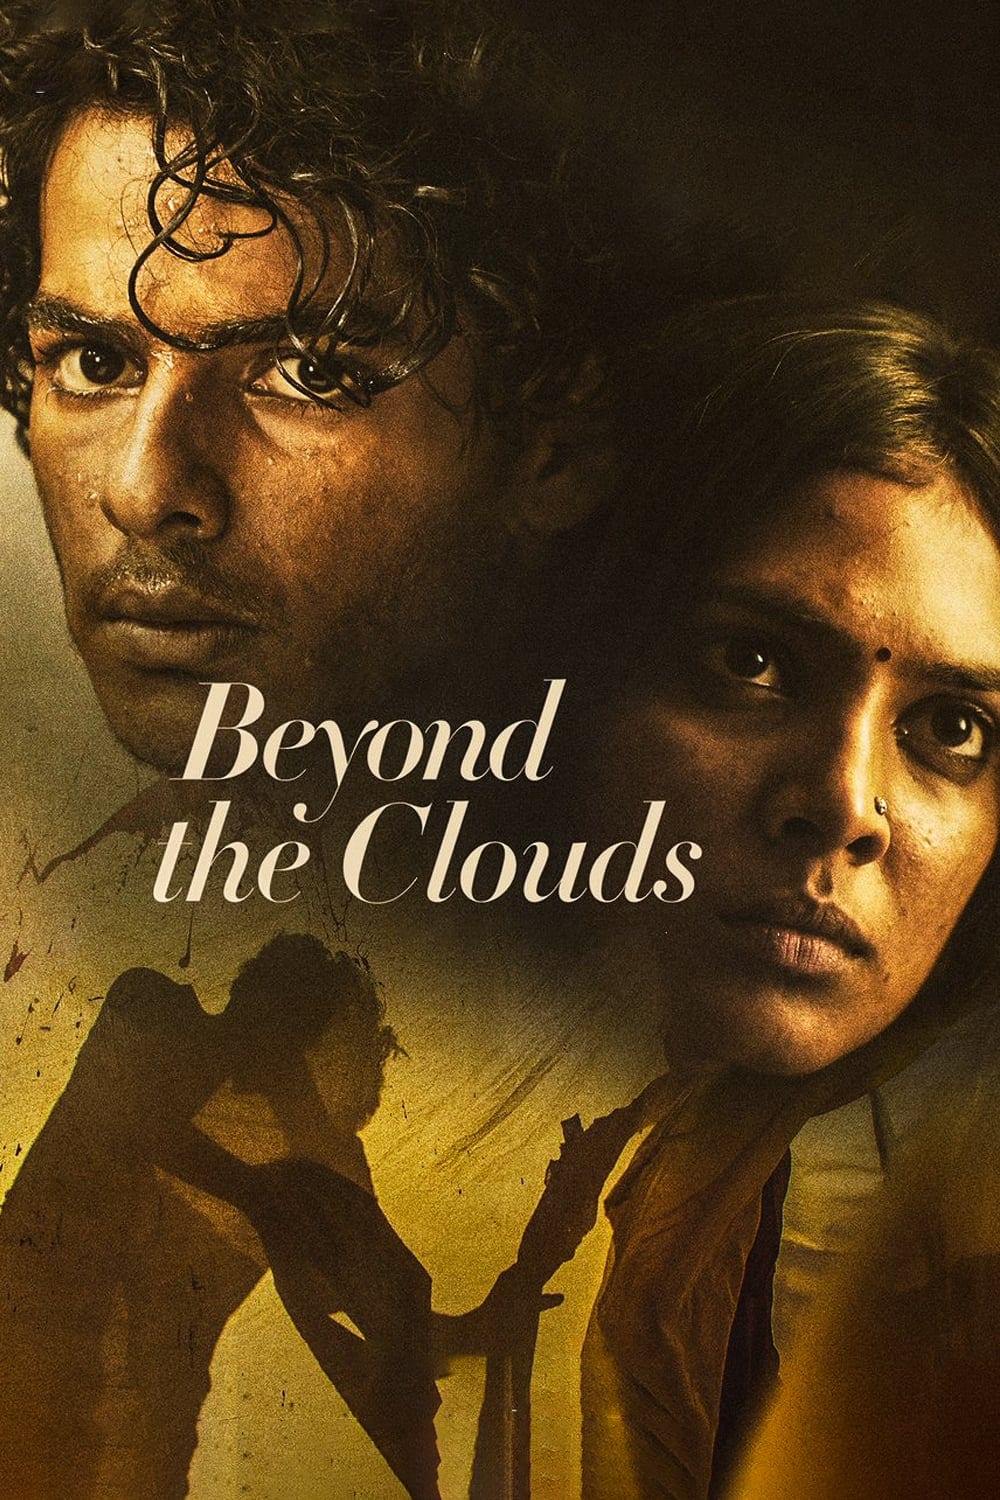 Poster for the movie "Beyond the Clouds"